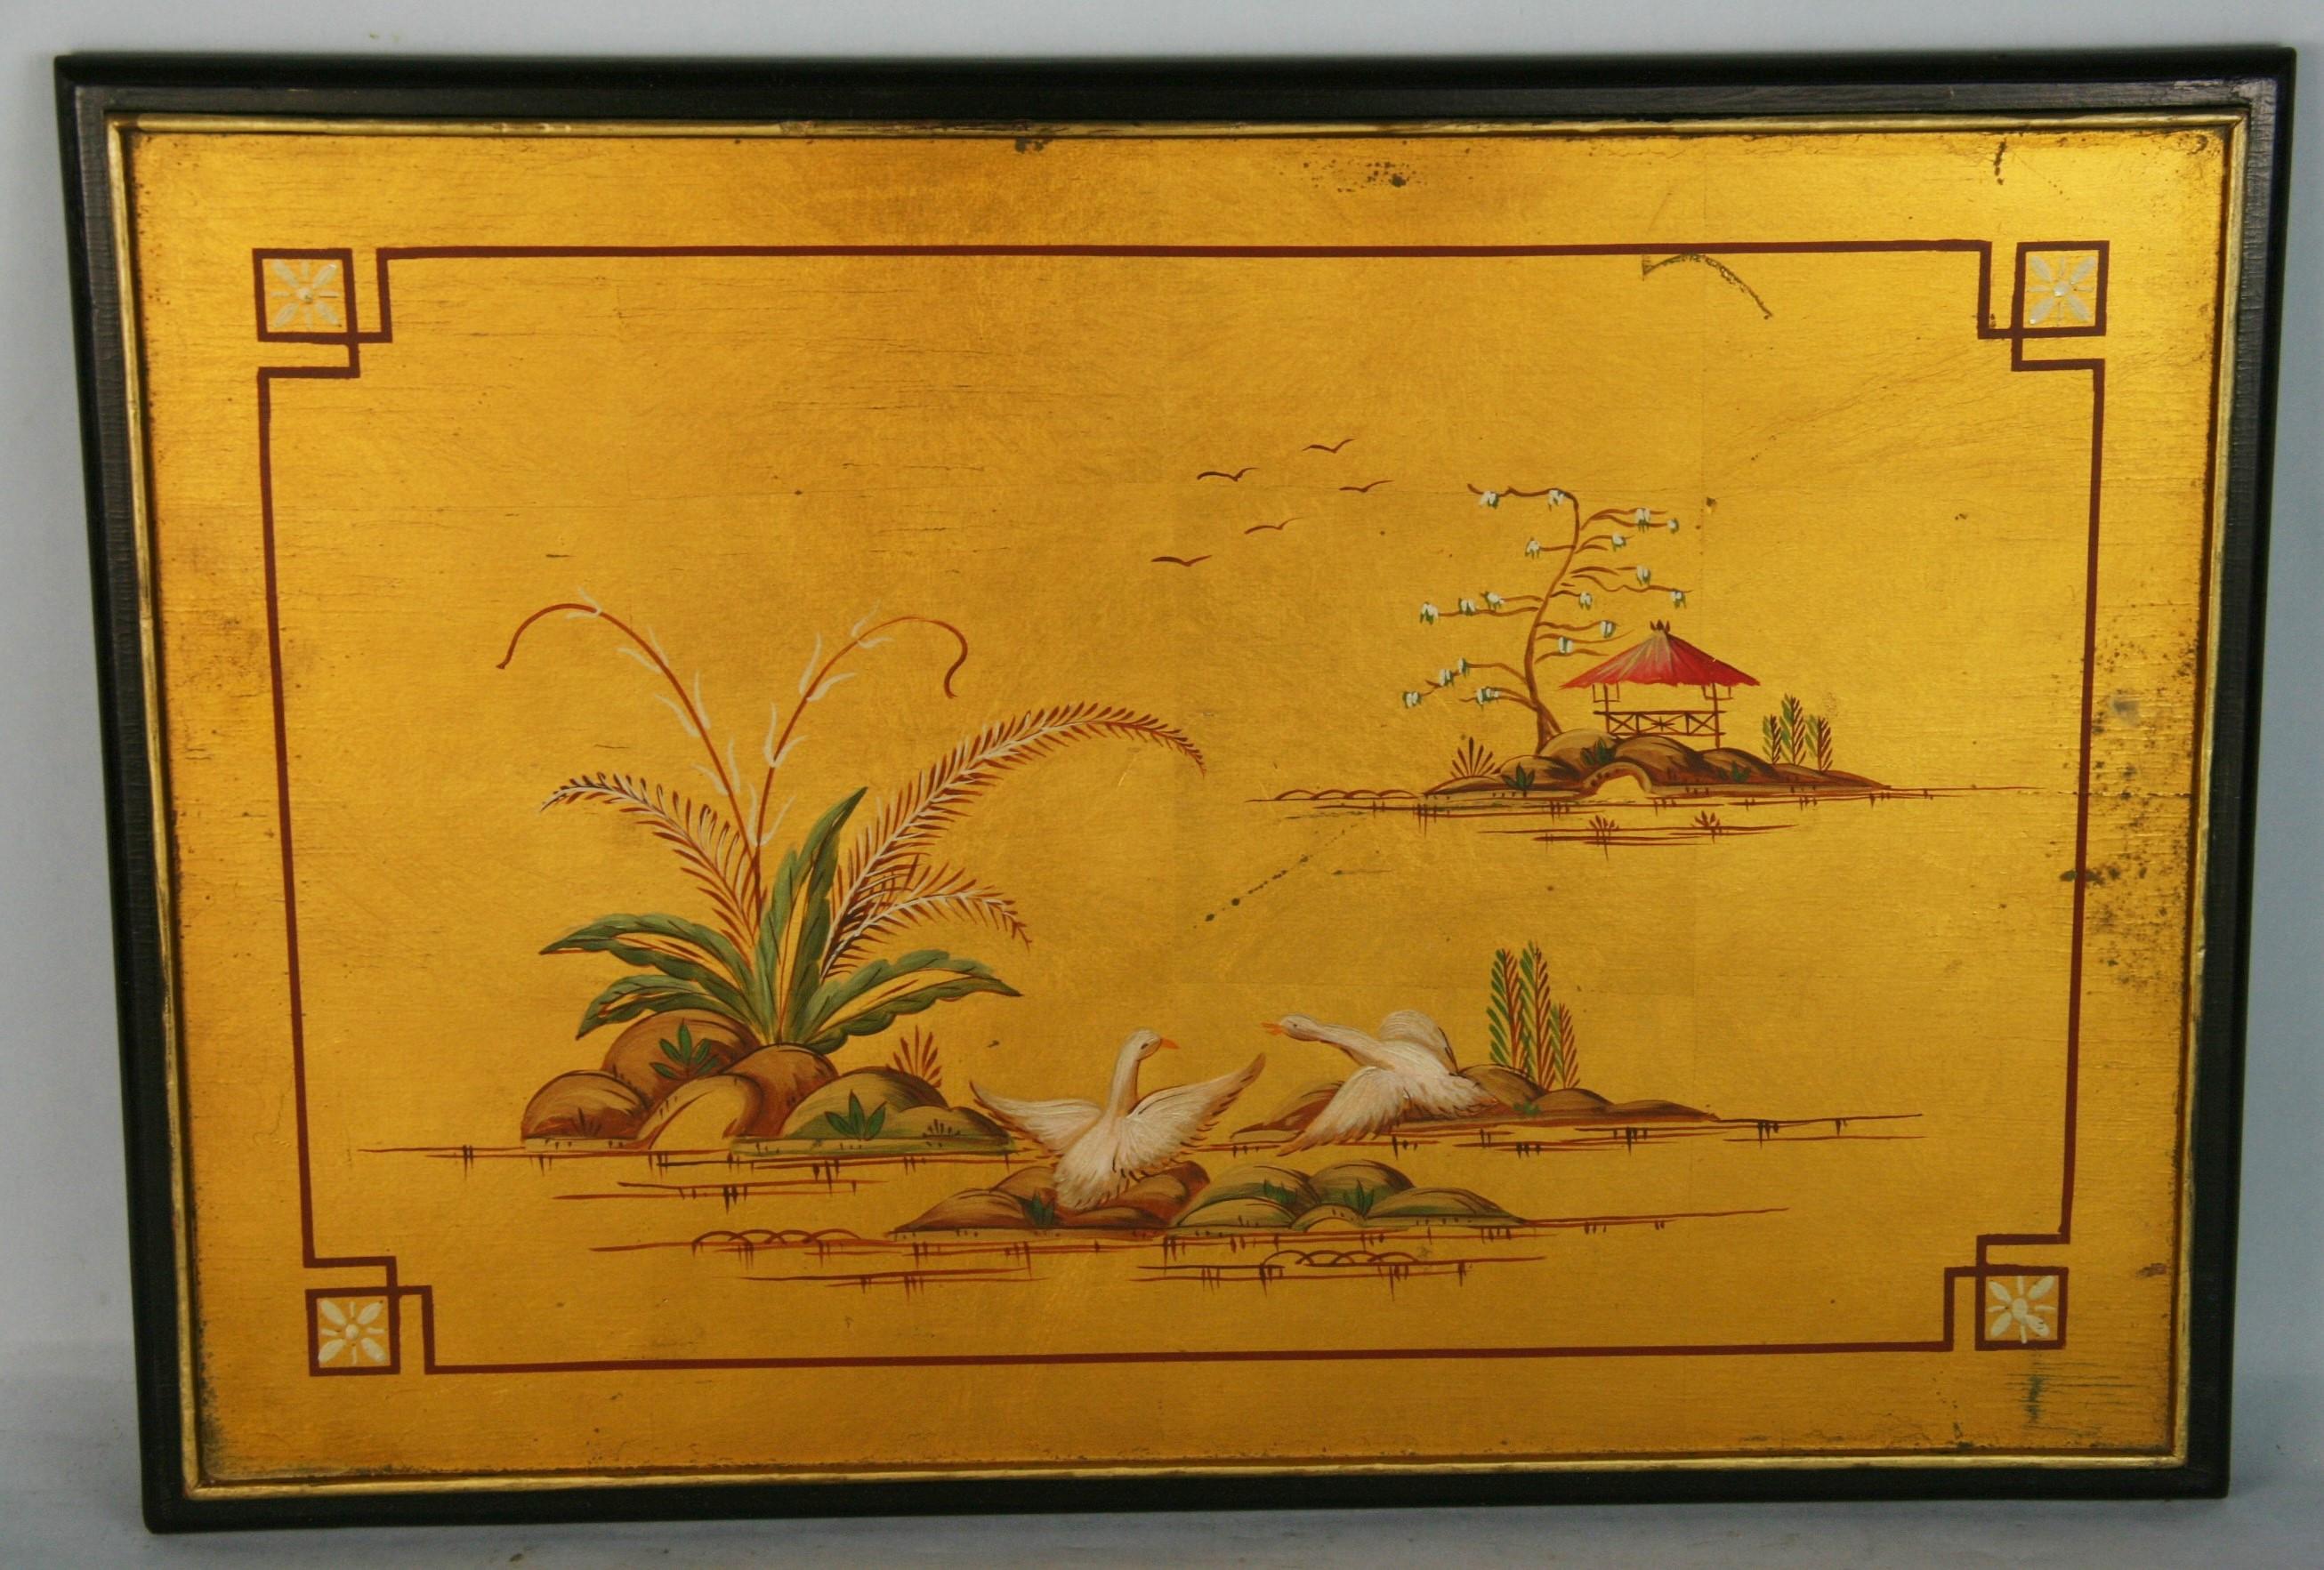 Unknown - Japanese Landscape Painting on Gilt Wood Panel For Sale at 1stDibs